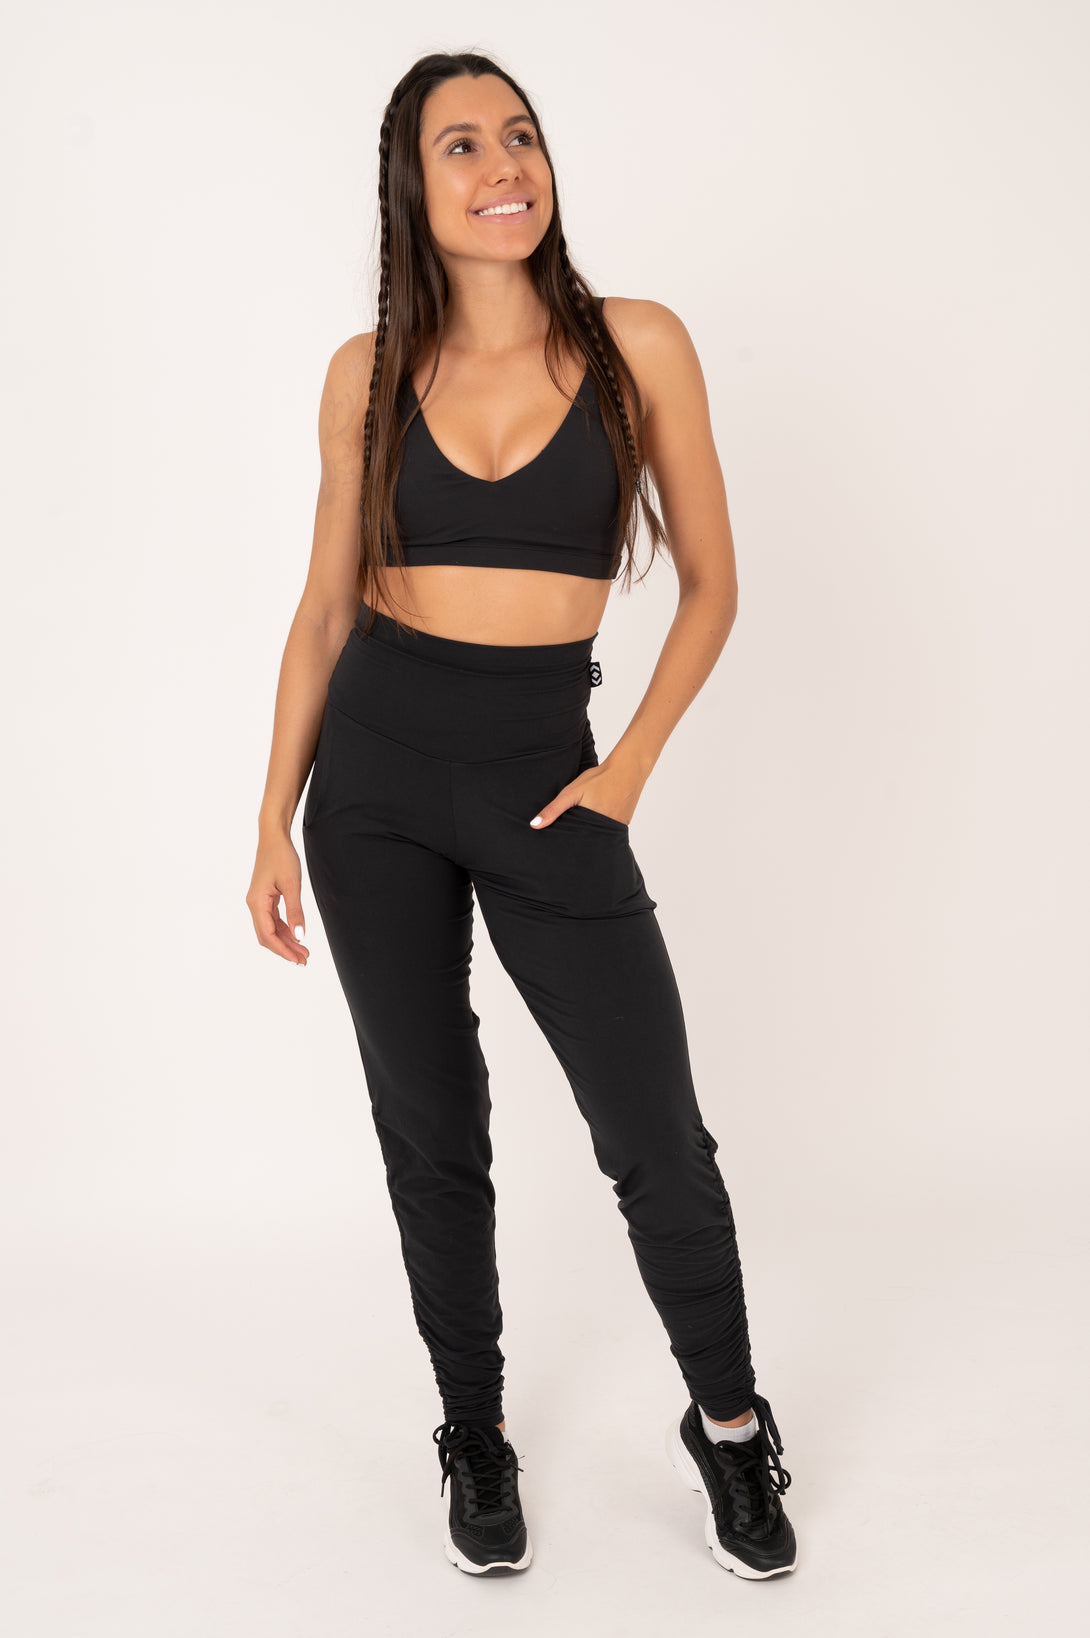 Black Soft To Touch - Jogger Long Tie Sided w/ Pockets - Exoticathletica